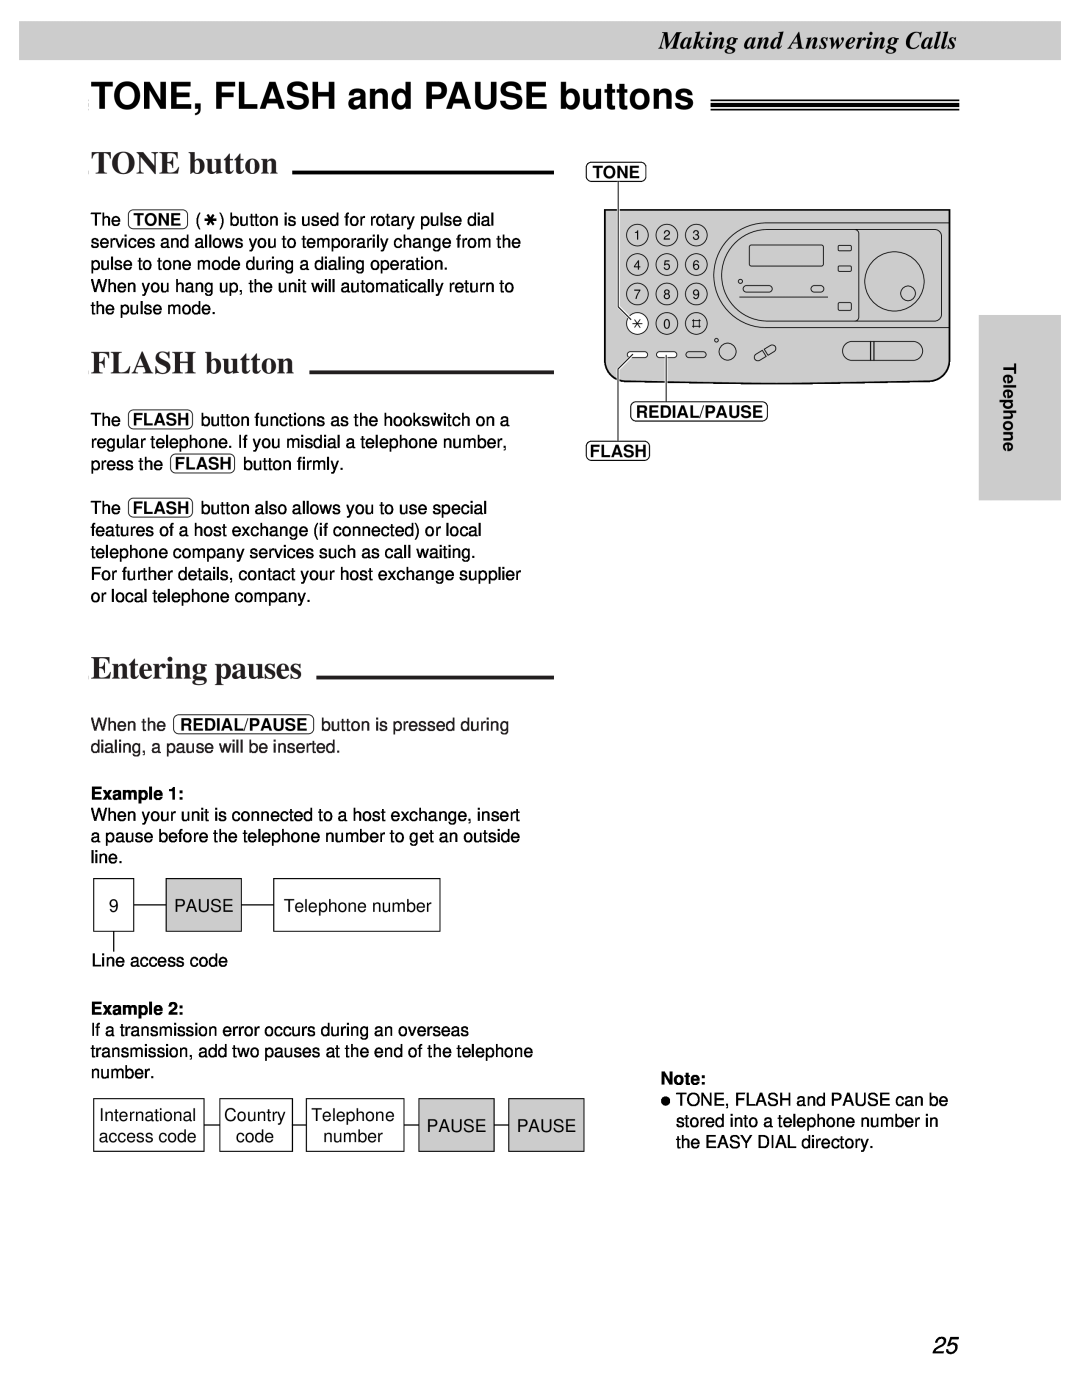 Panasonic KX-FT31BX TONE, FLASH and PAUSE buttons, TONE button, FLASH button, Entering pauses, Making and Answering Calls 